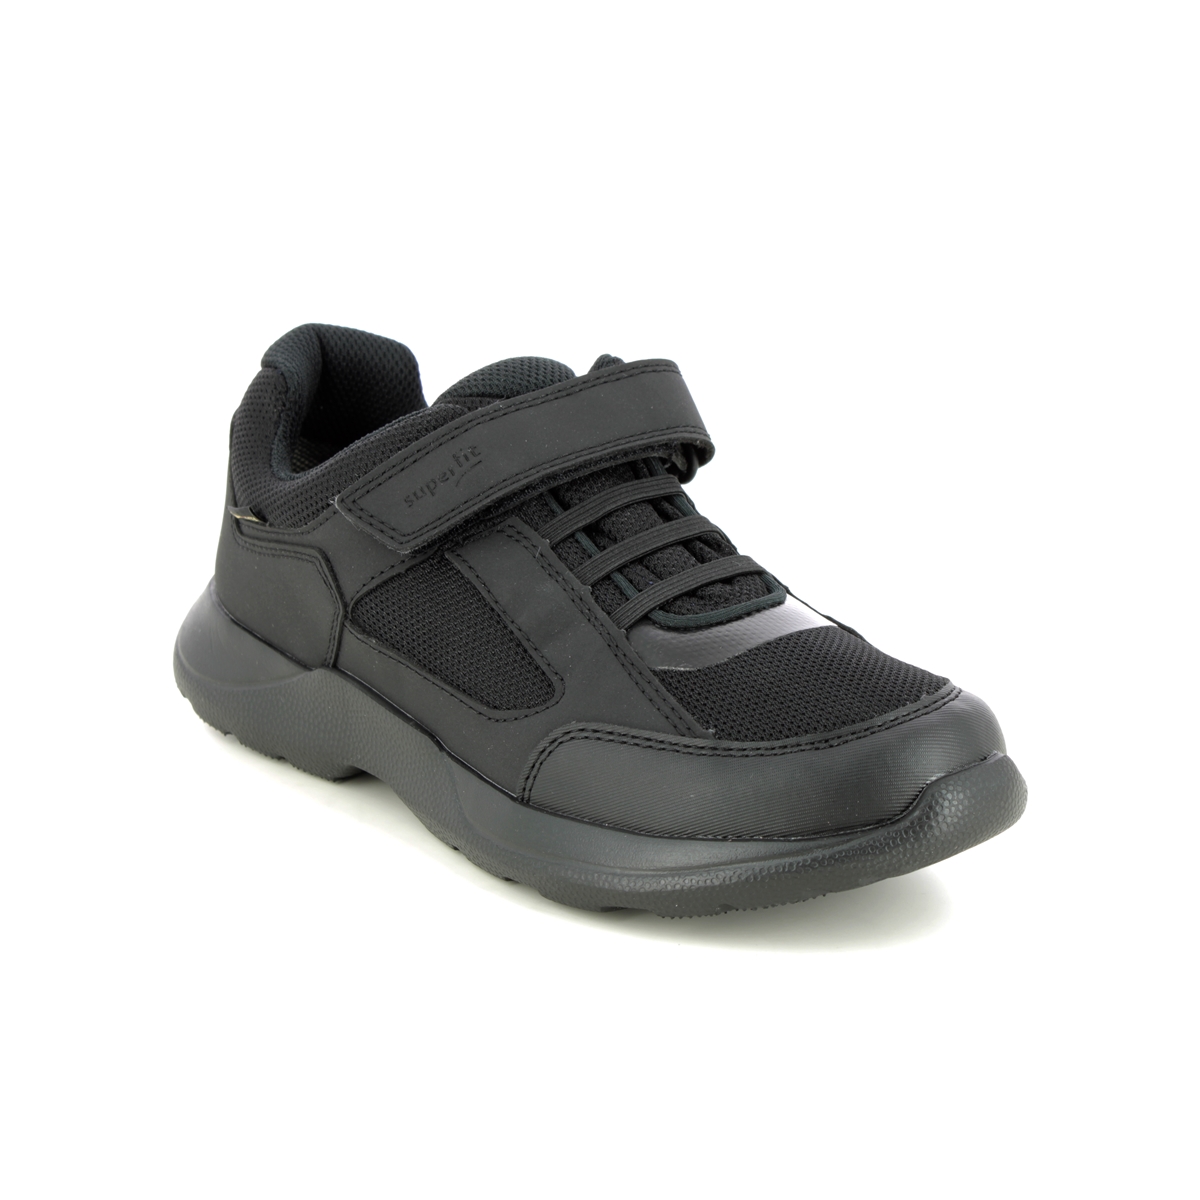 Superfit Rush Gtx Bungee Black Kids Trainers 1006223-0000 In Size 40 In Plain Black For kids